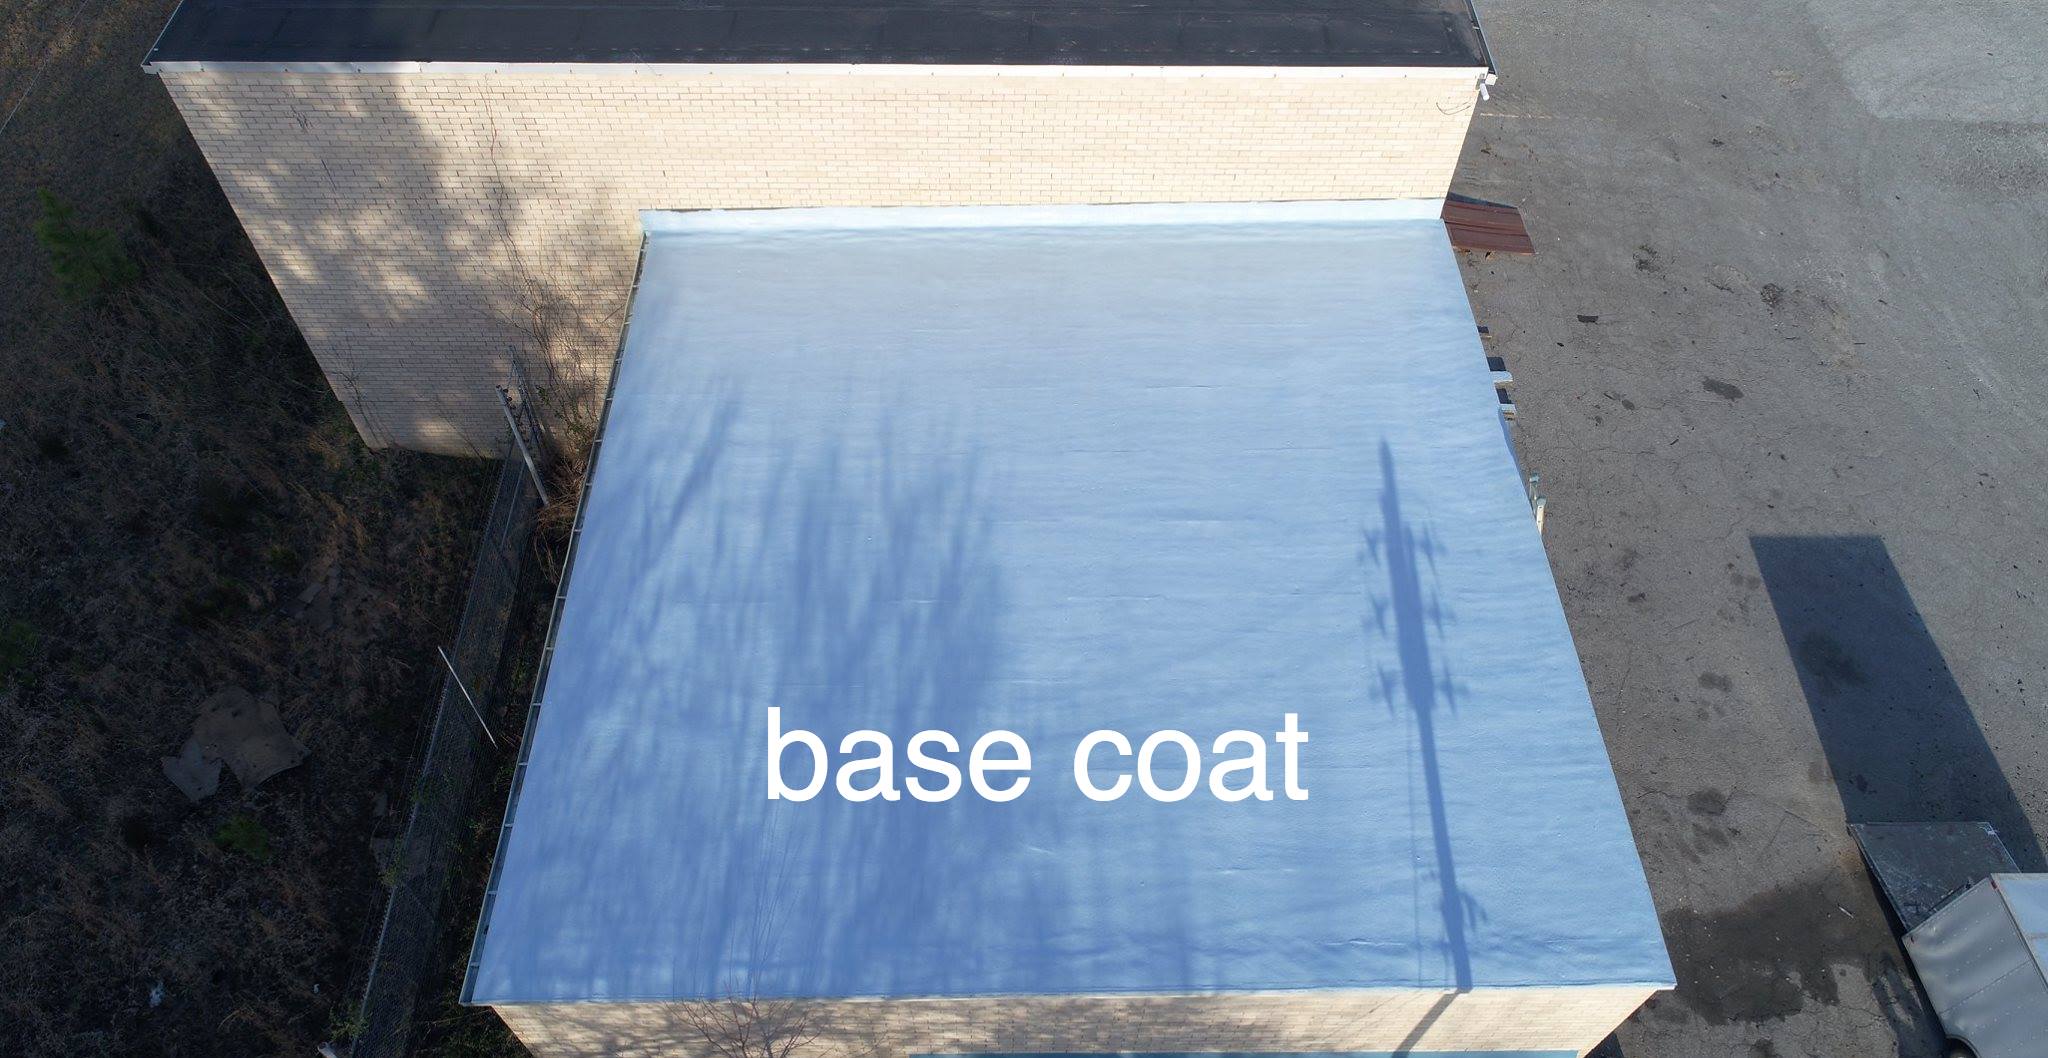 Picture of the base coat on a roofing project.